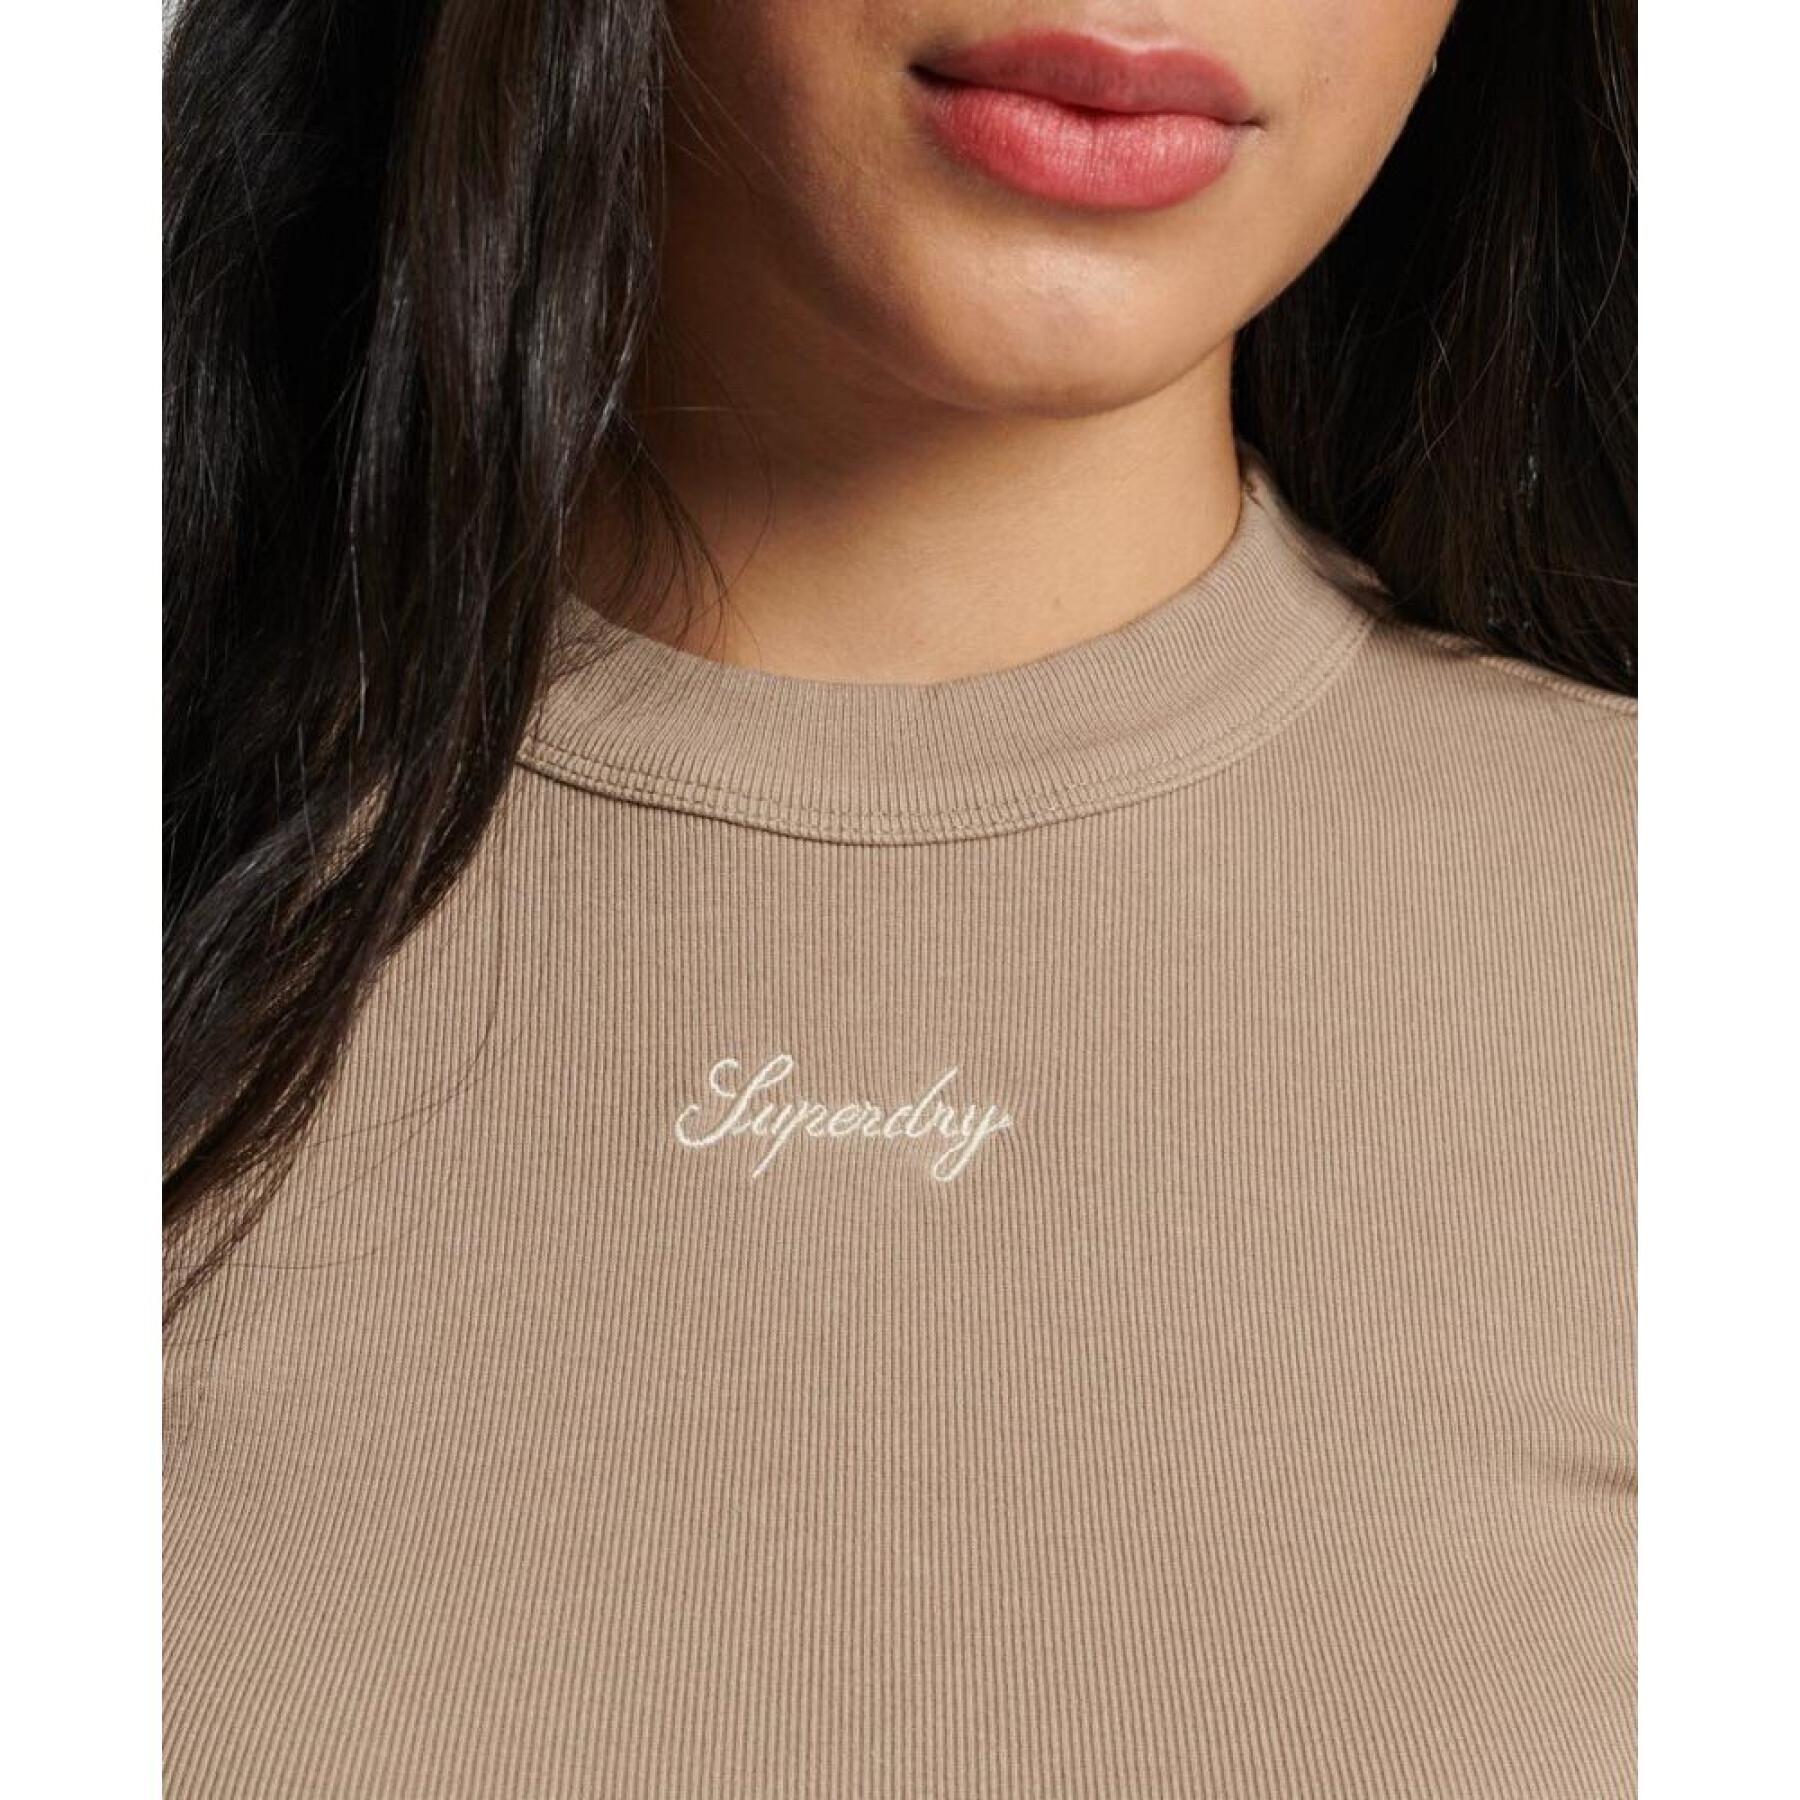 Women's ribbed embroidered long-sleeved fitted T-shirt Superdry